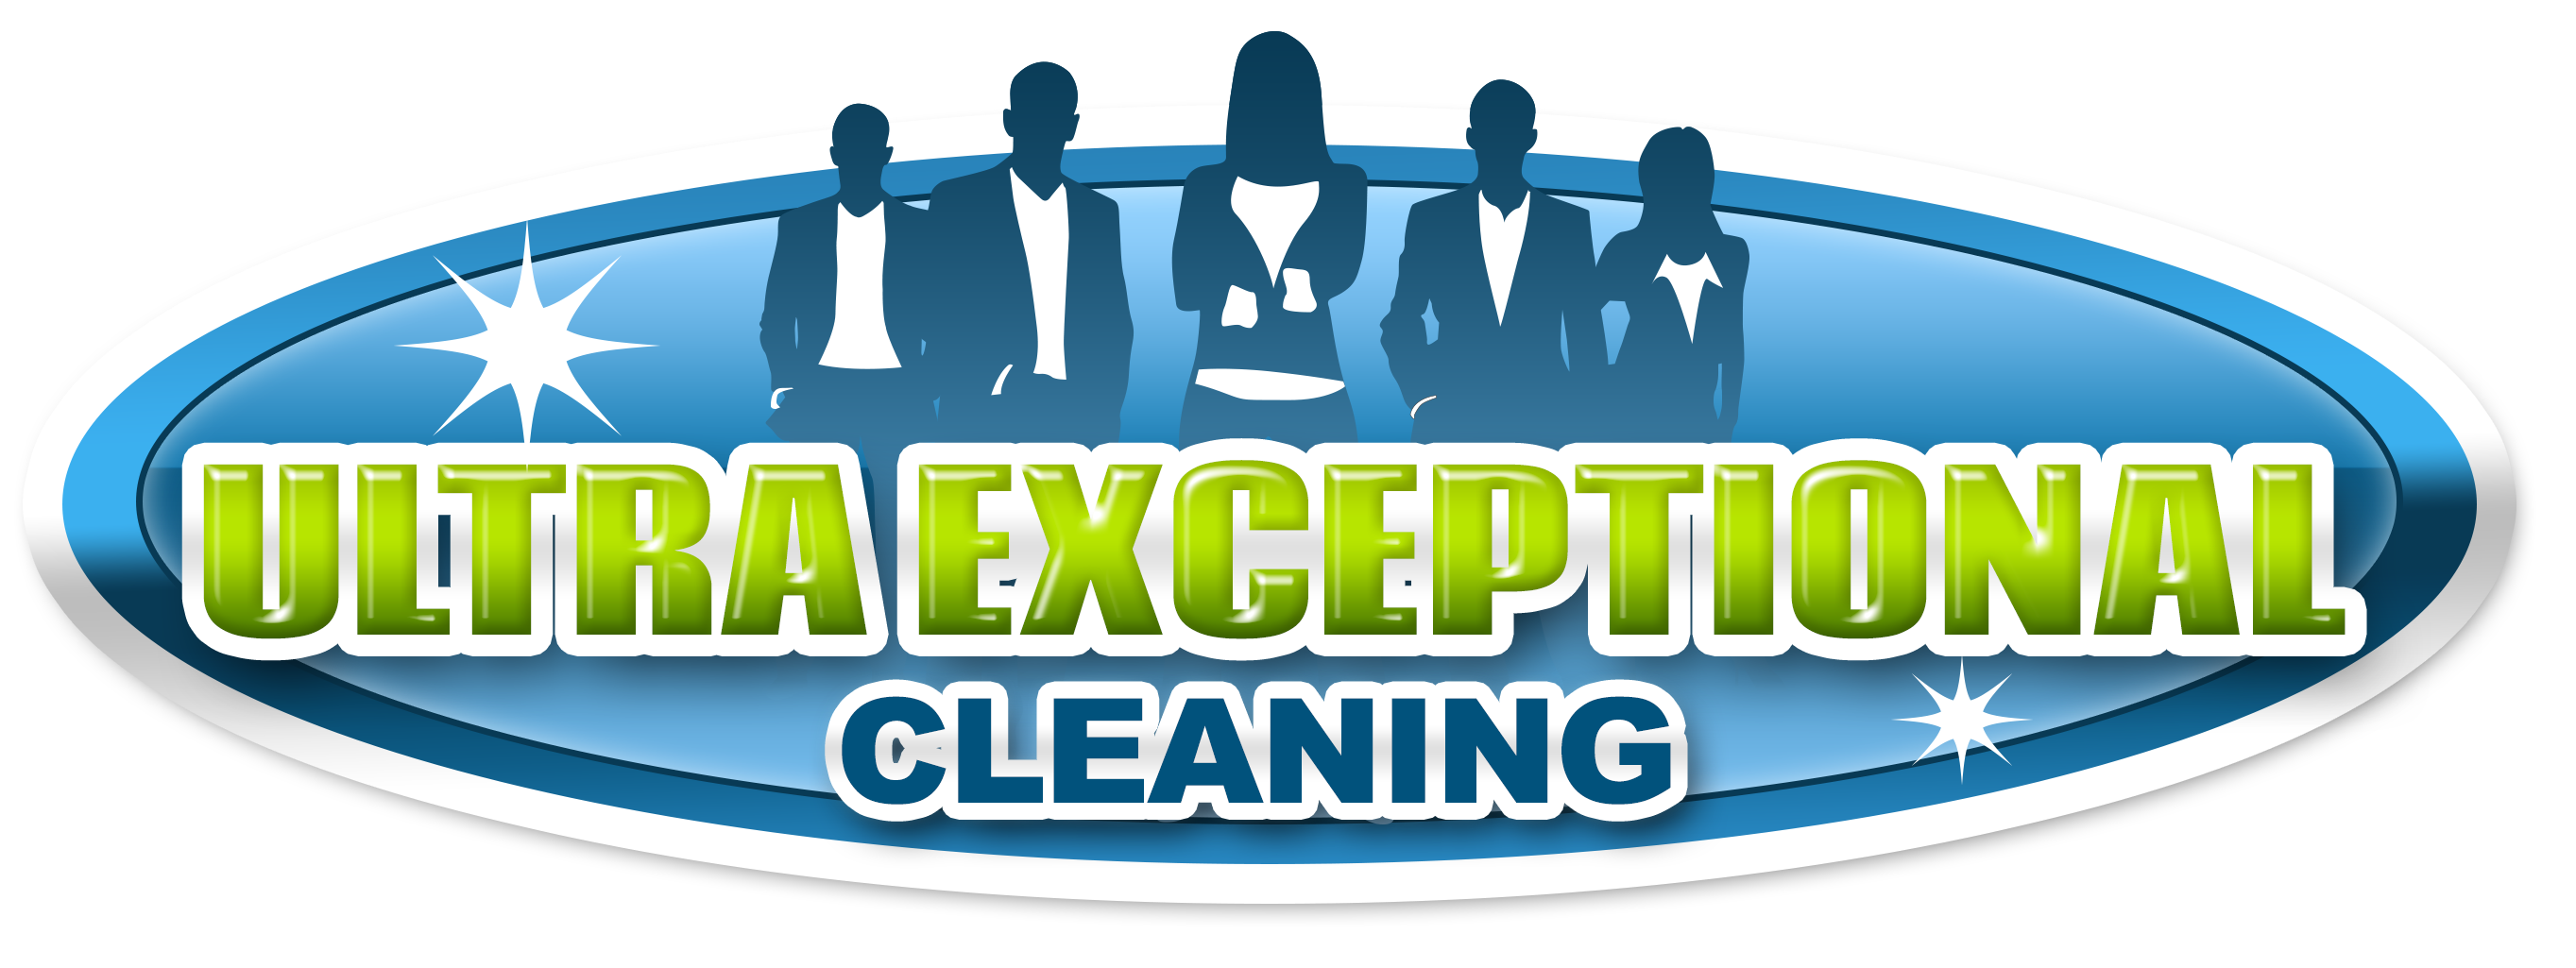 Ultra Exceptional Cleaning